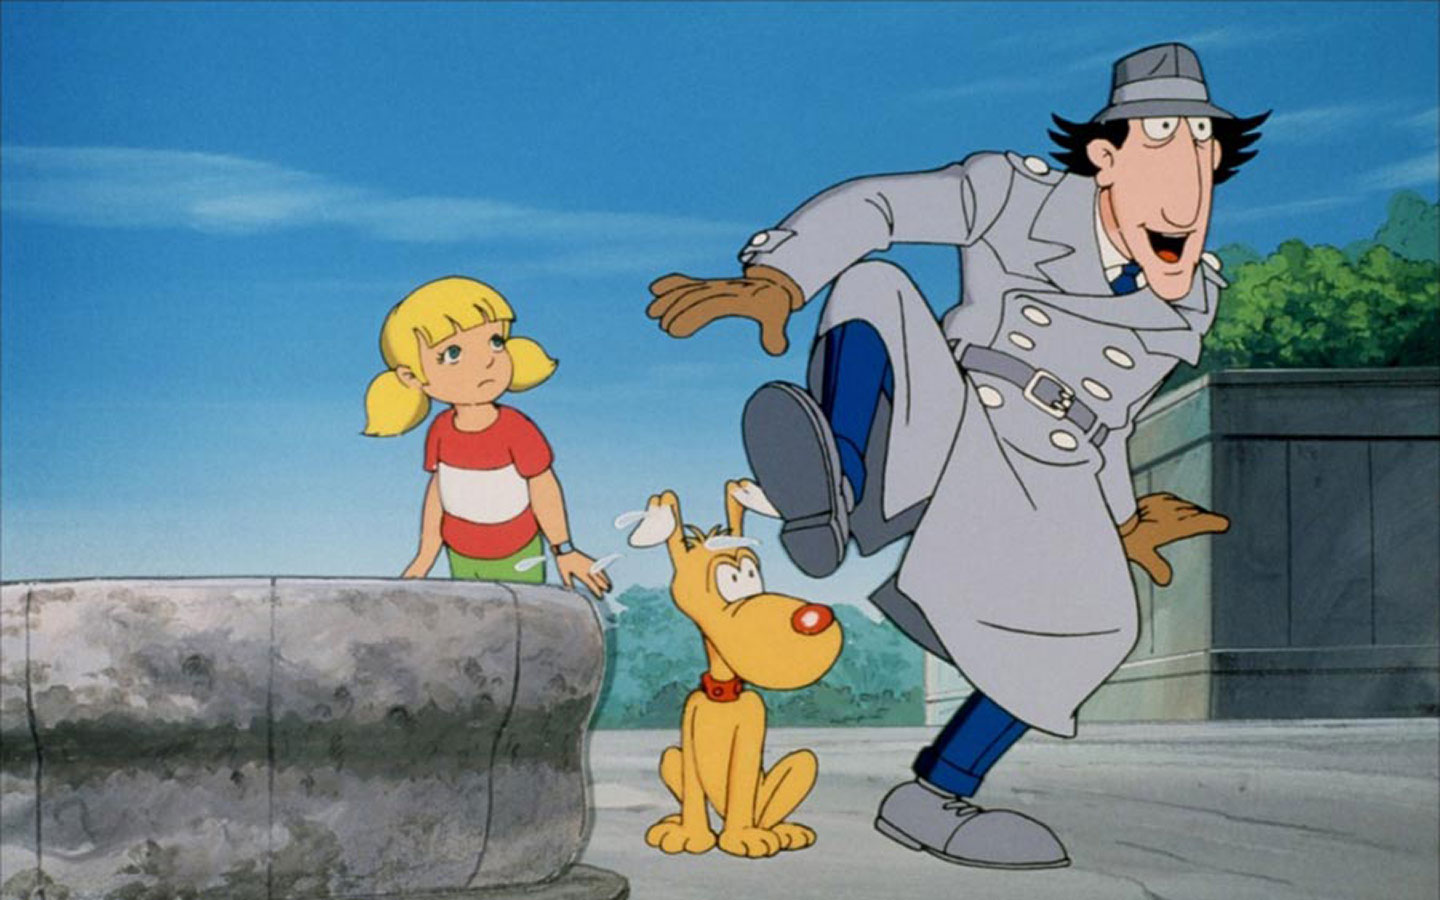 Can You Match These Characters to Their Classic Cartoons? 14